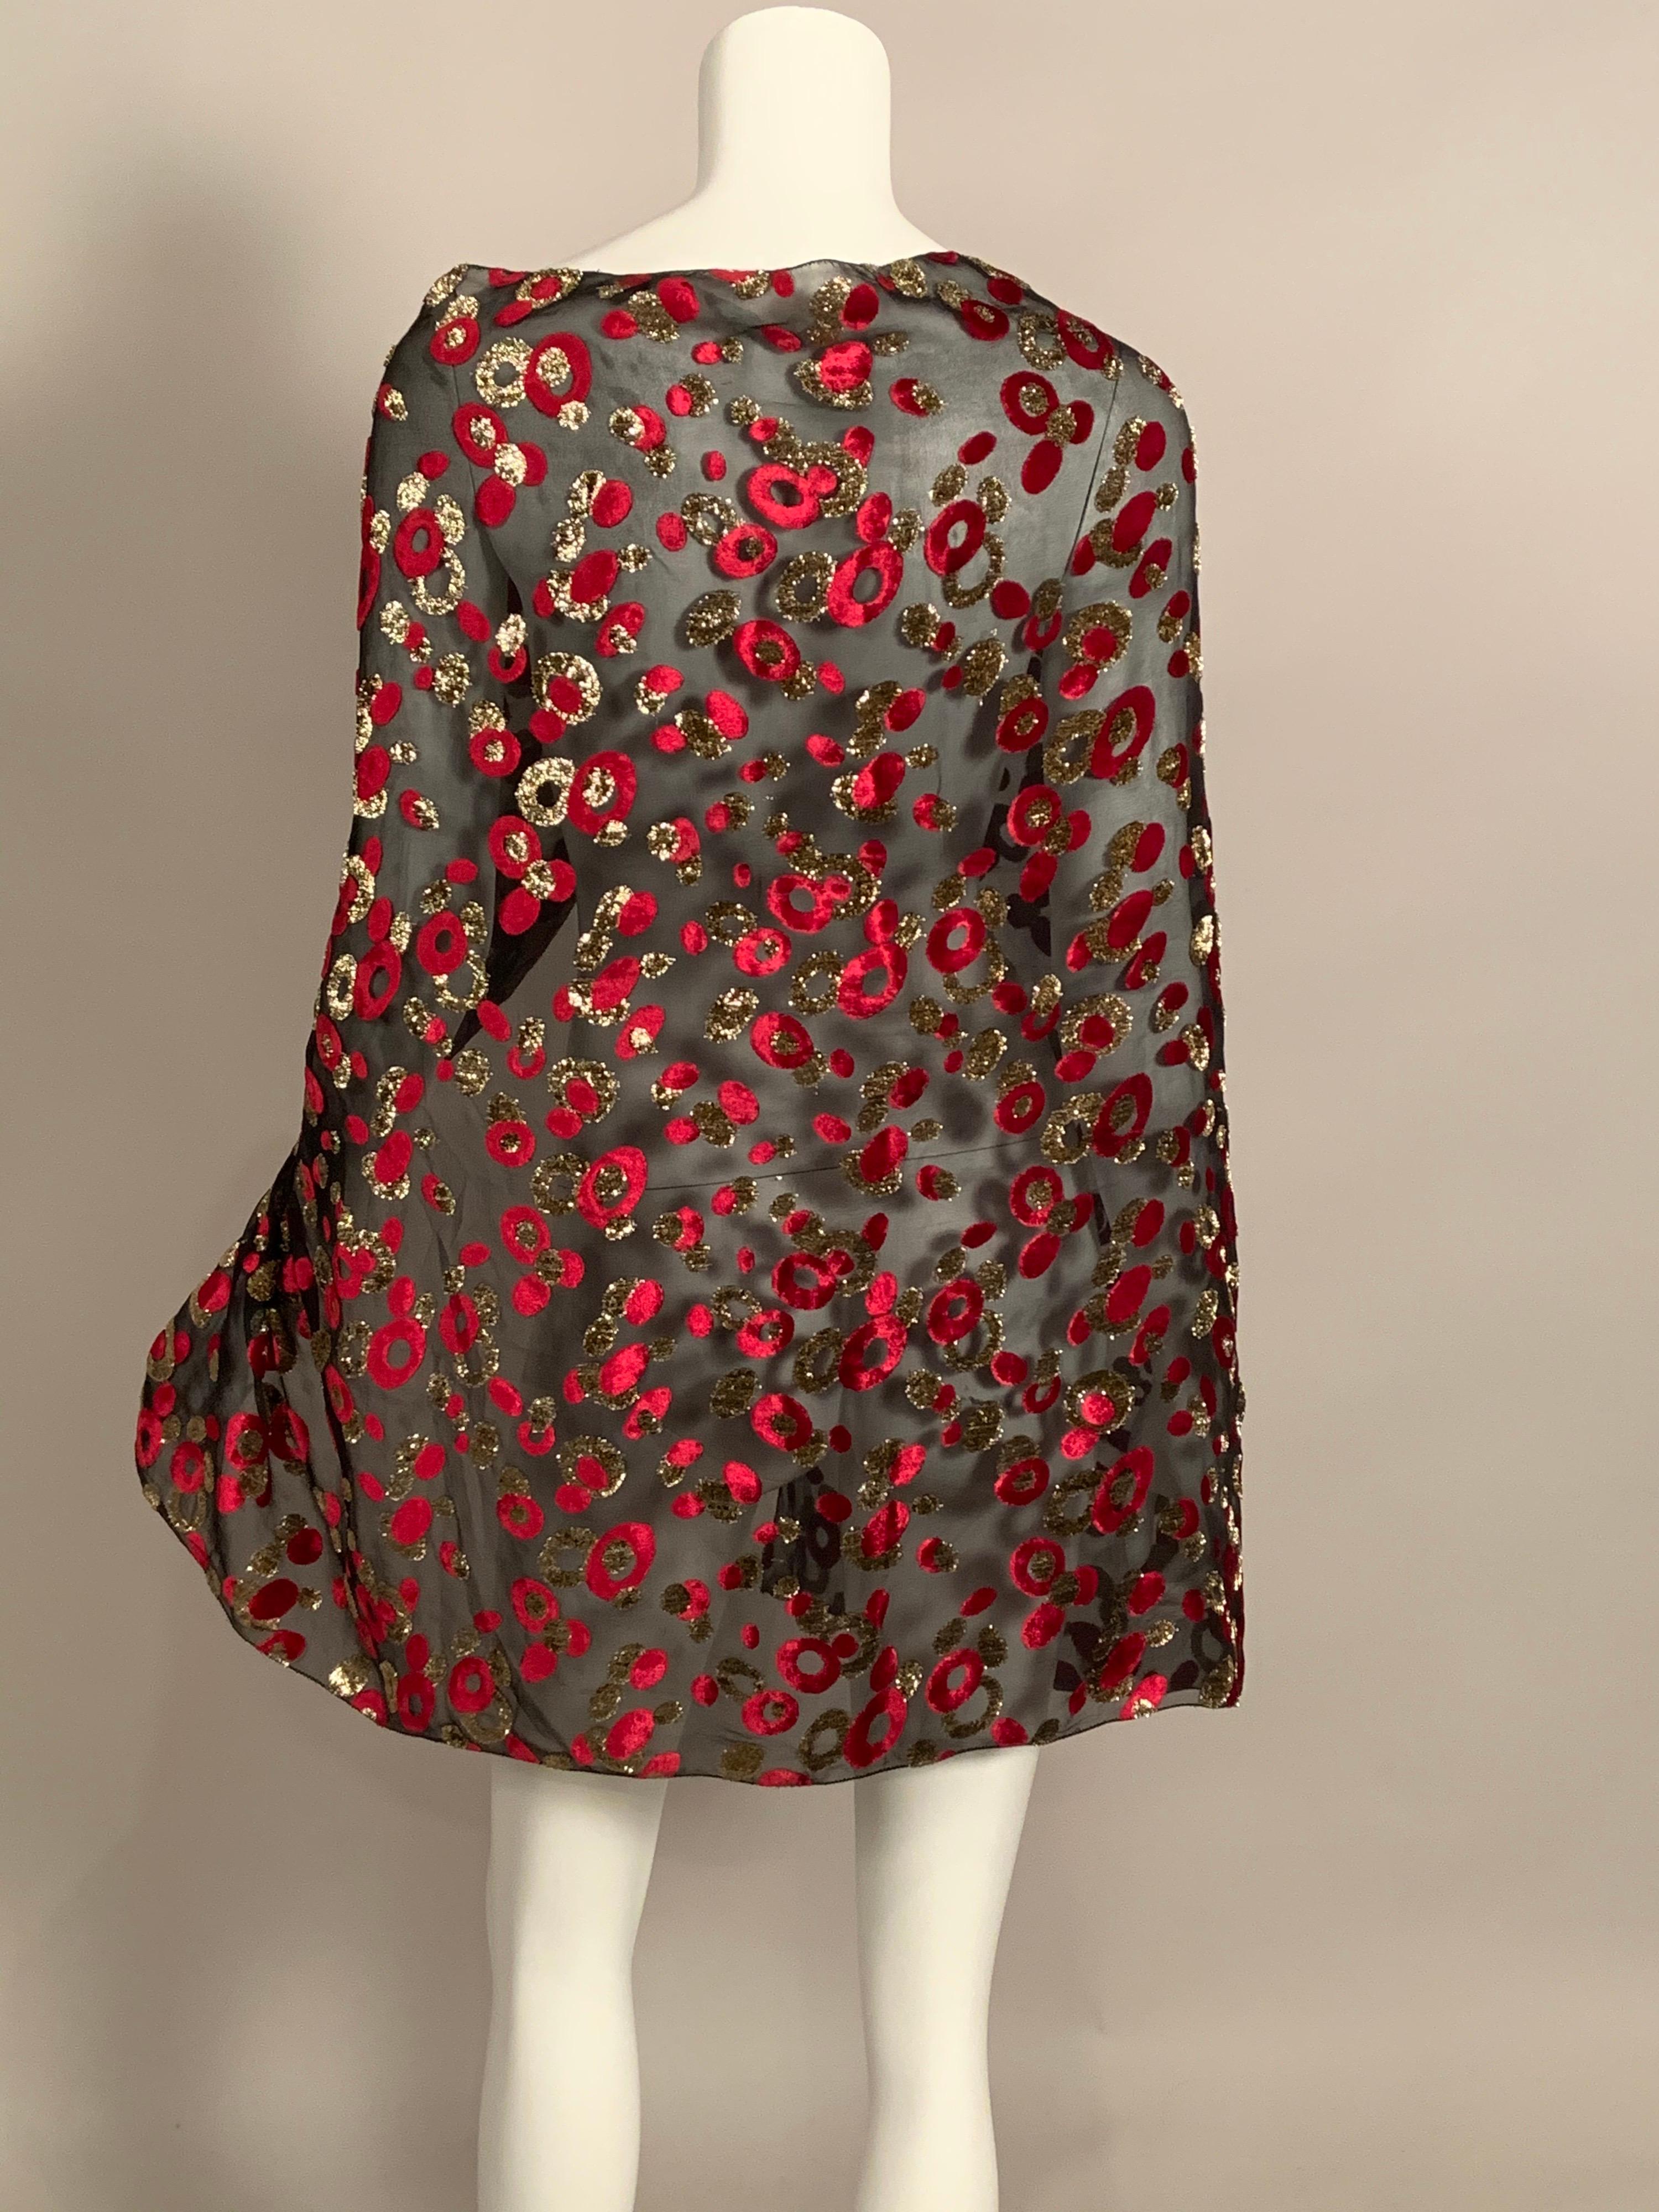 This beautiful shawl has a delicate black silk chiffon base with red and metallic gold velvet circles and dots adding color and whimsy. One size fits all and it is in excellent condition.
Measurements; Length 52